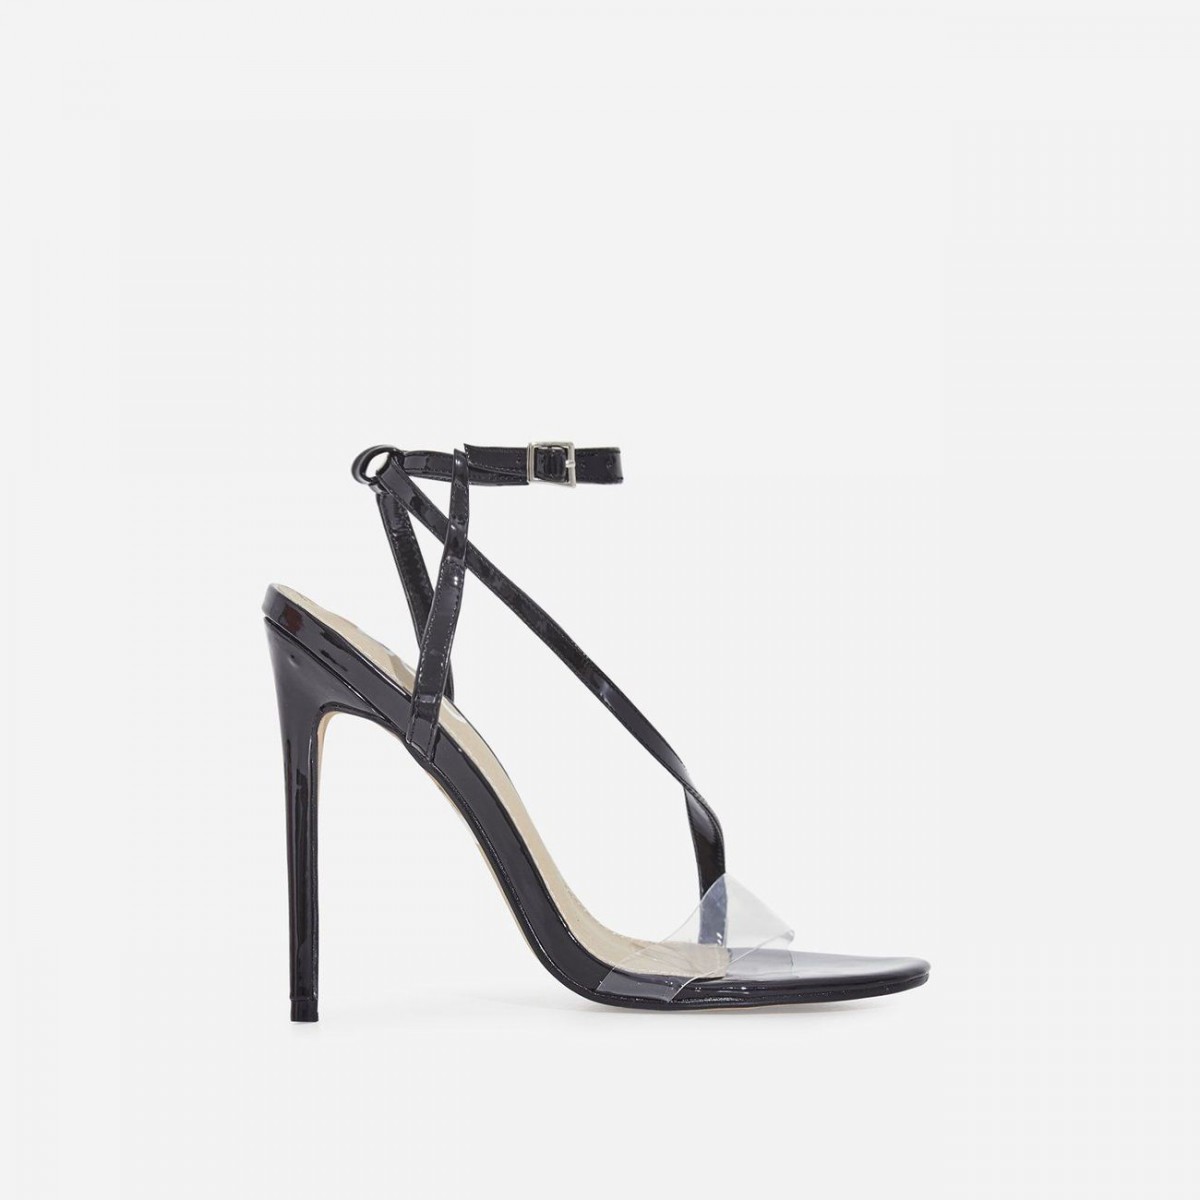 EGO Mystic Perspex Barely There Heel In Black Patent – Shoes Post